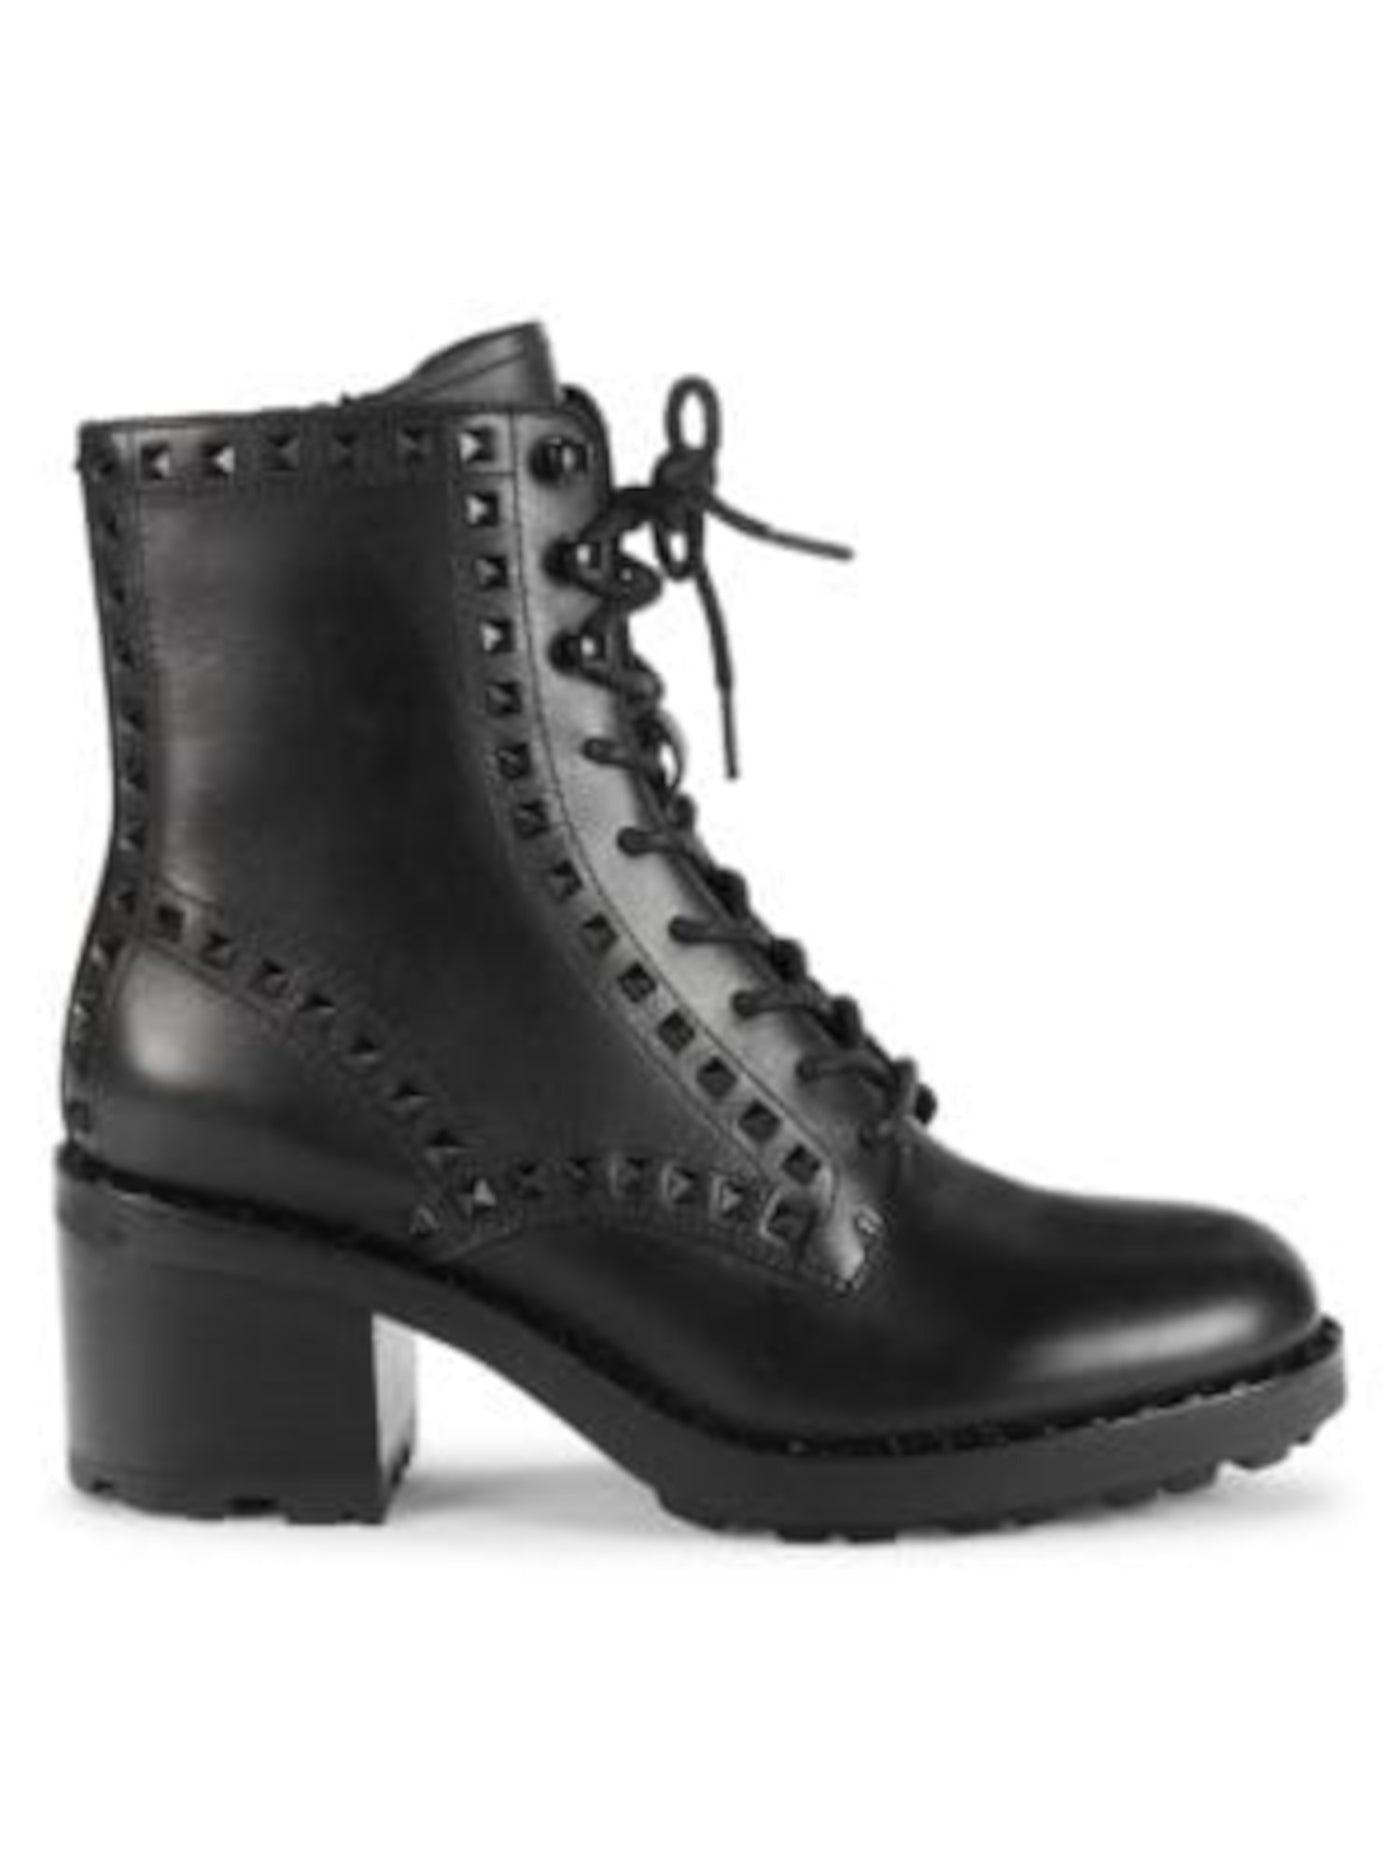 ASH Womens Black Lace-Up Studded Padded Xin Round Toe Block Heel Zip-Up Leather Booties 38